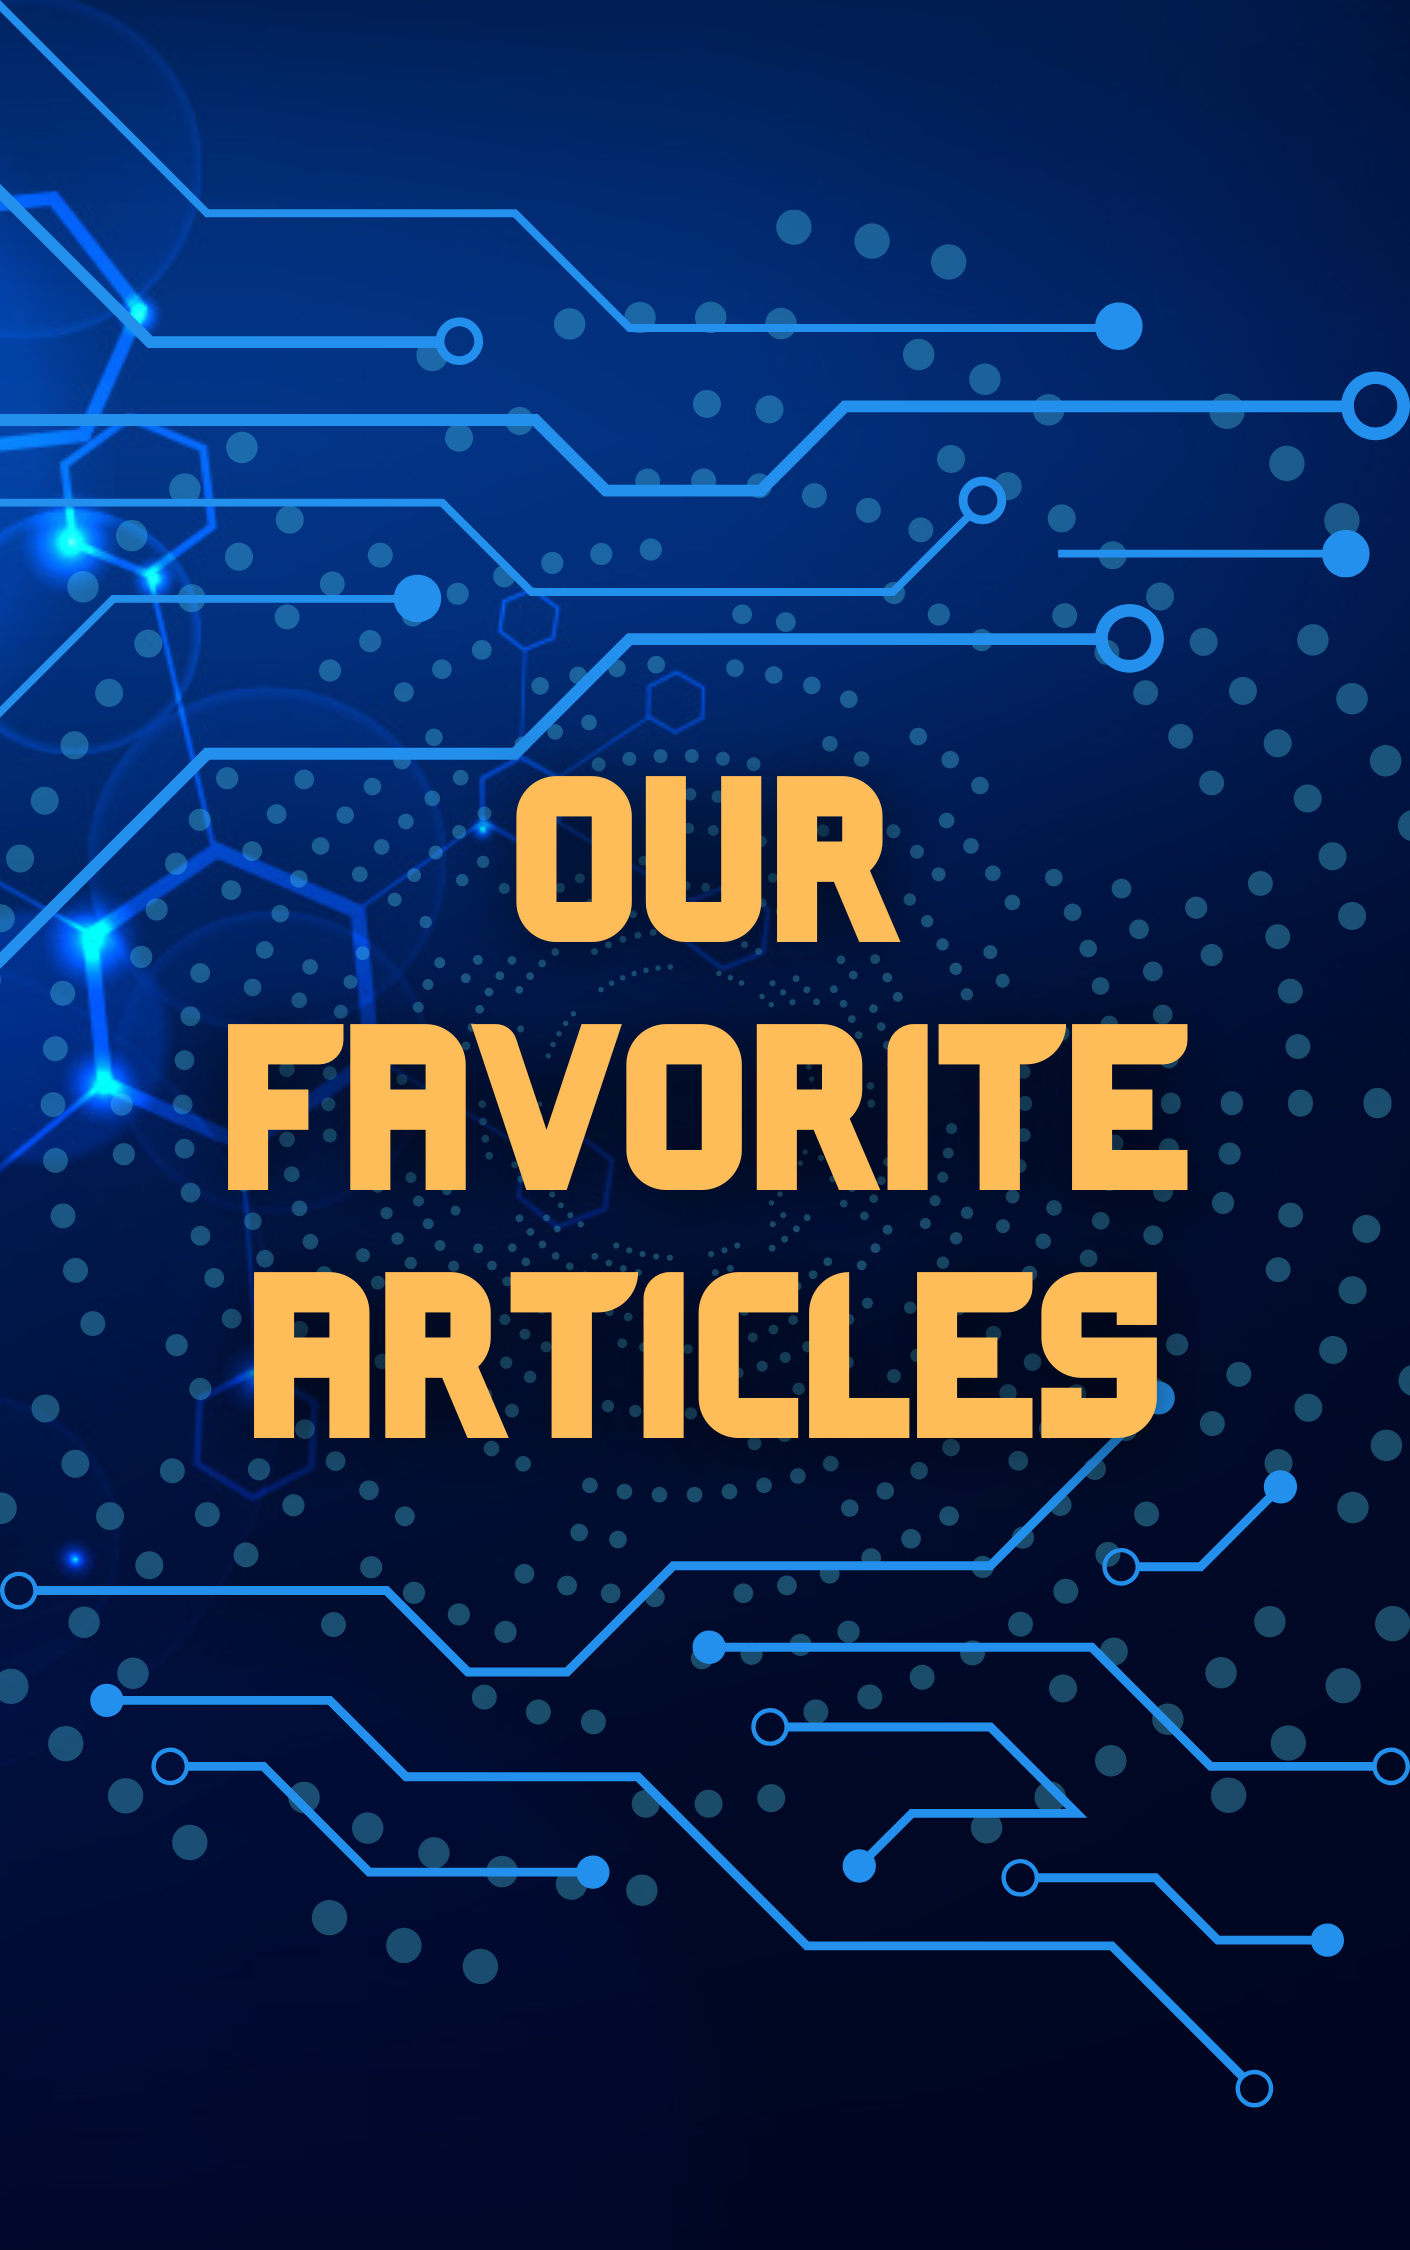 Our Favorite Articles